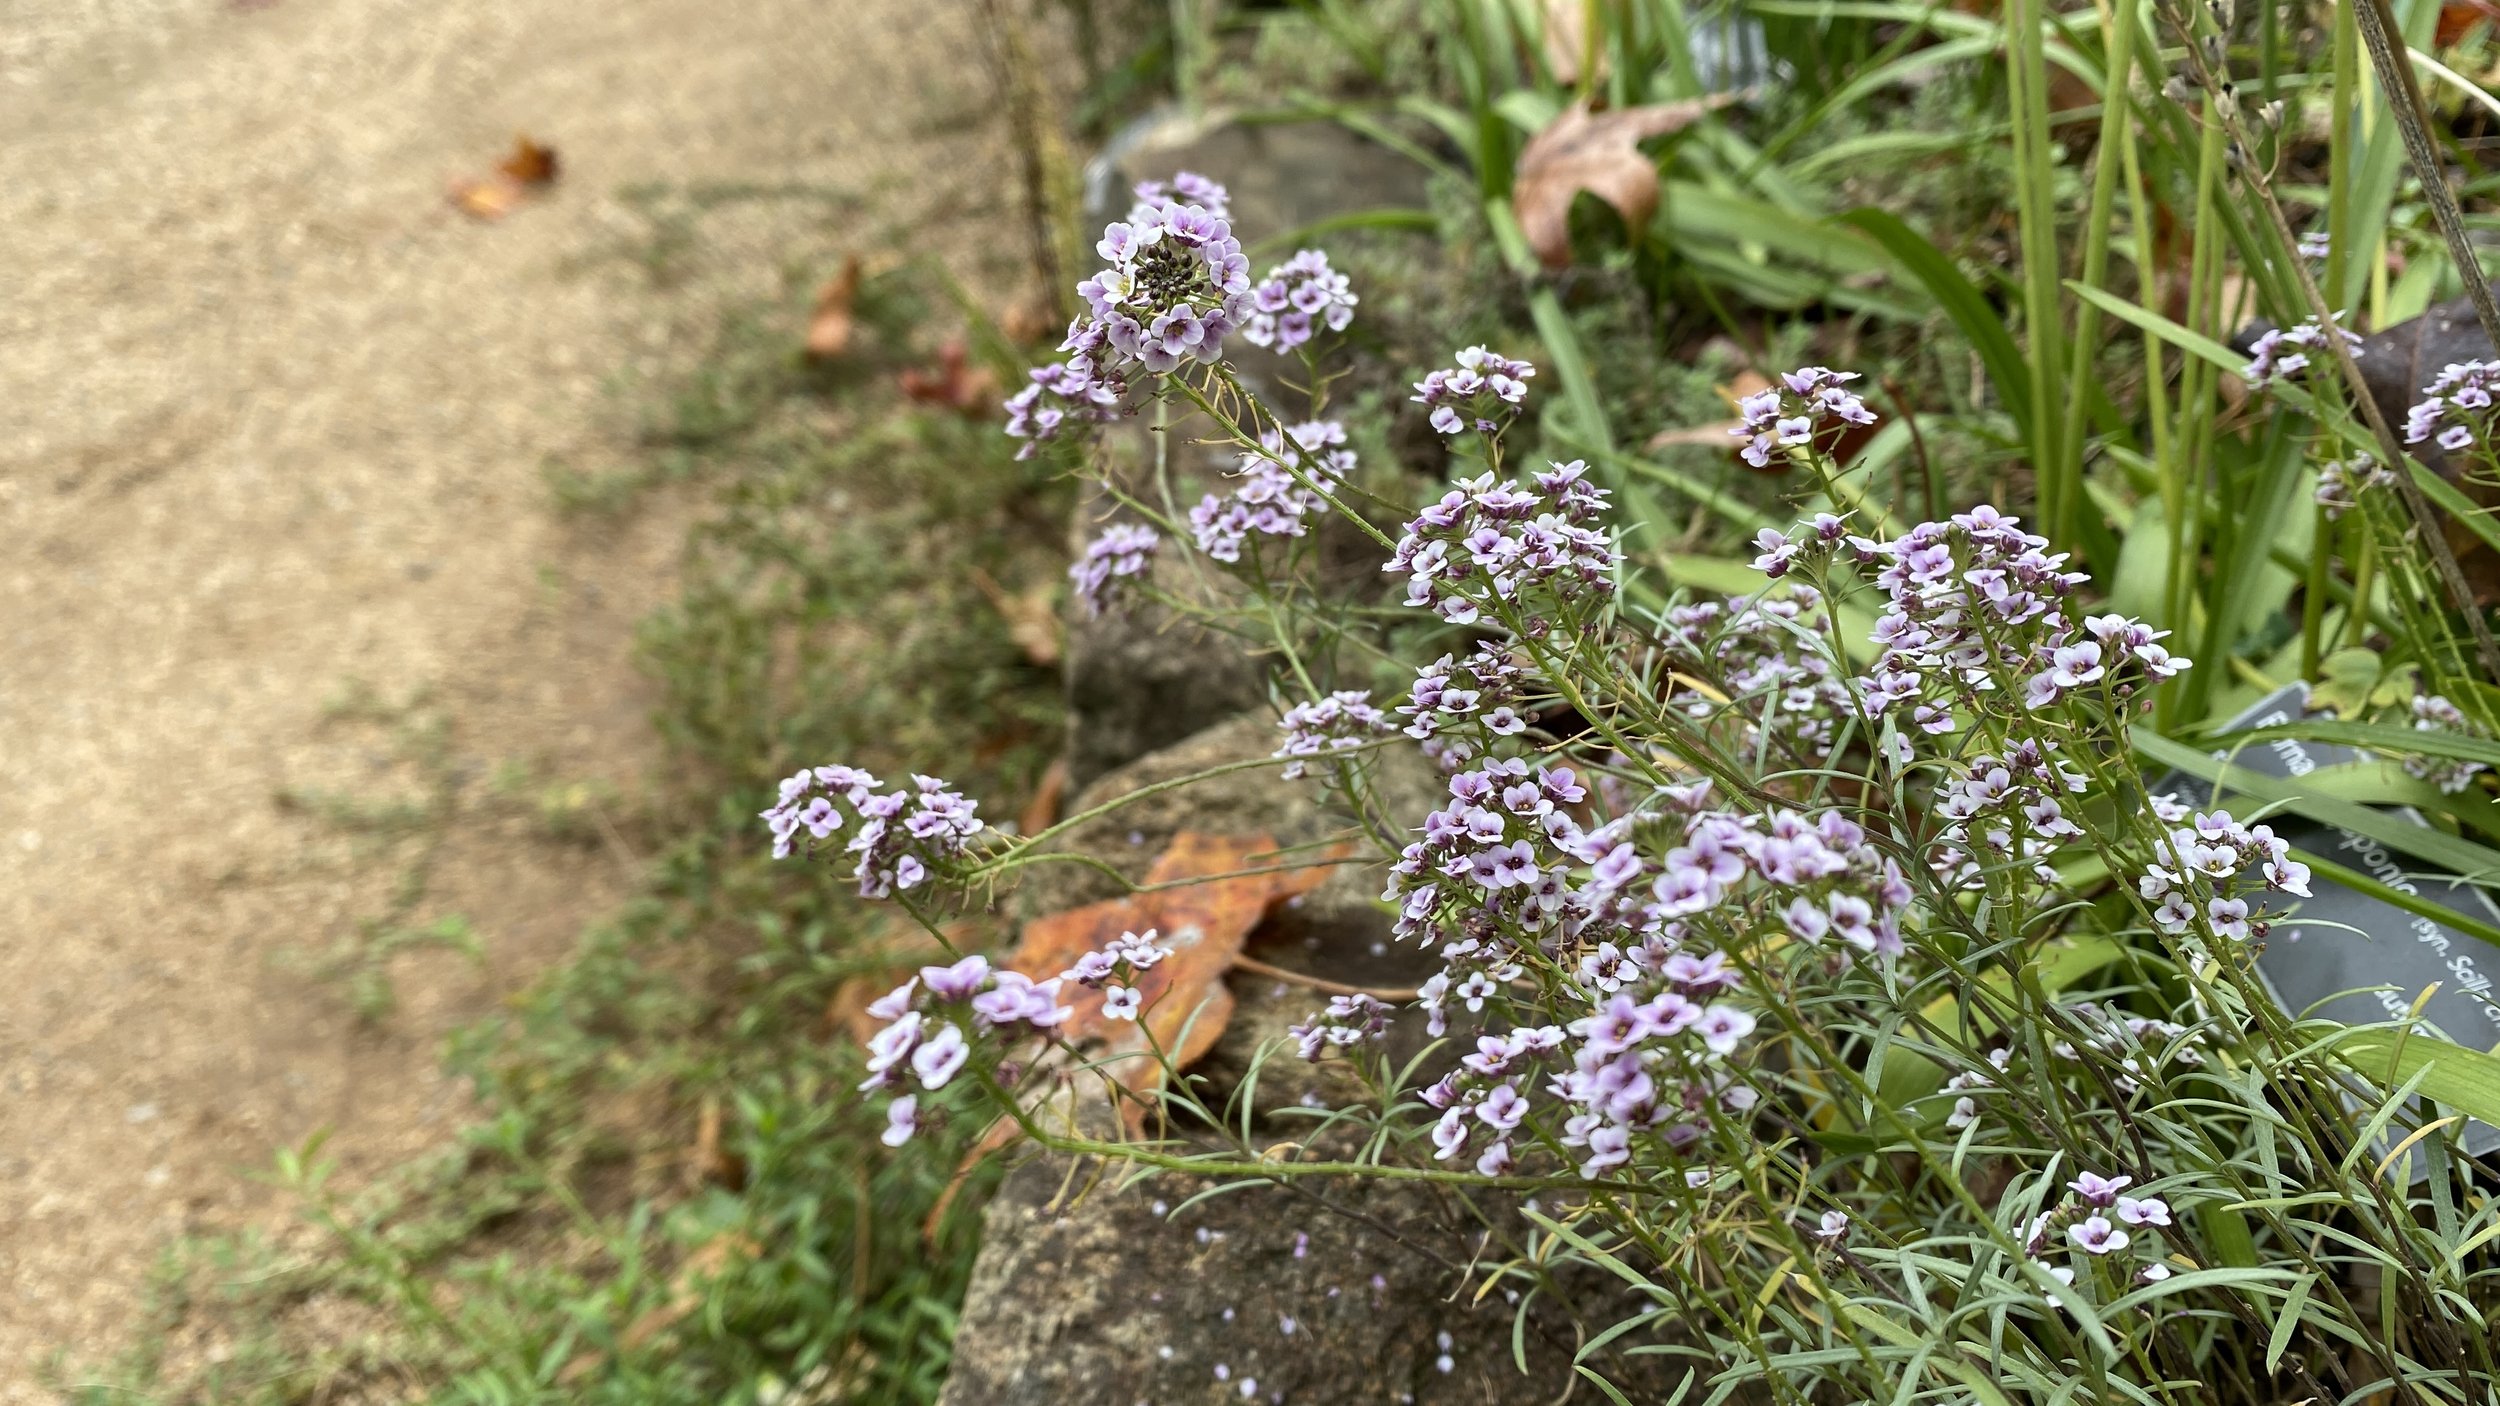  I now realize I should have planted  way  more  Lobularia maritima  Blushing Princess (sweet alyssum) throughout the garden.  Plants set out in the spring have bloomed non-stop, and should continue until a hard freeze puts an end to them. 